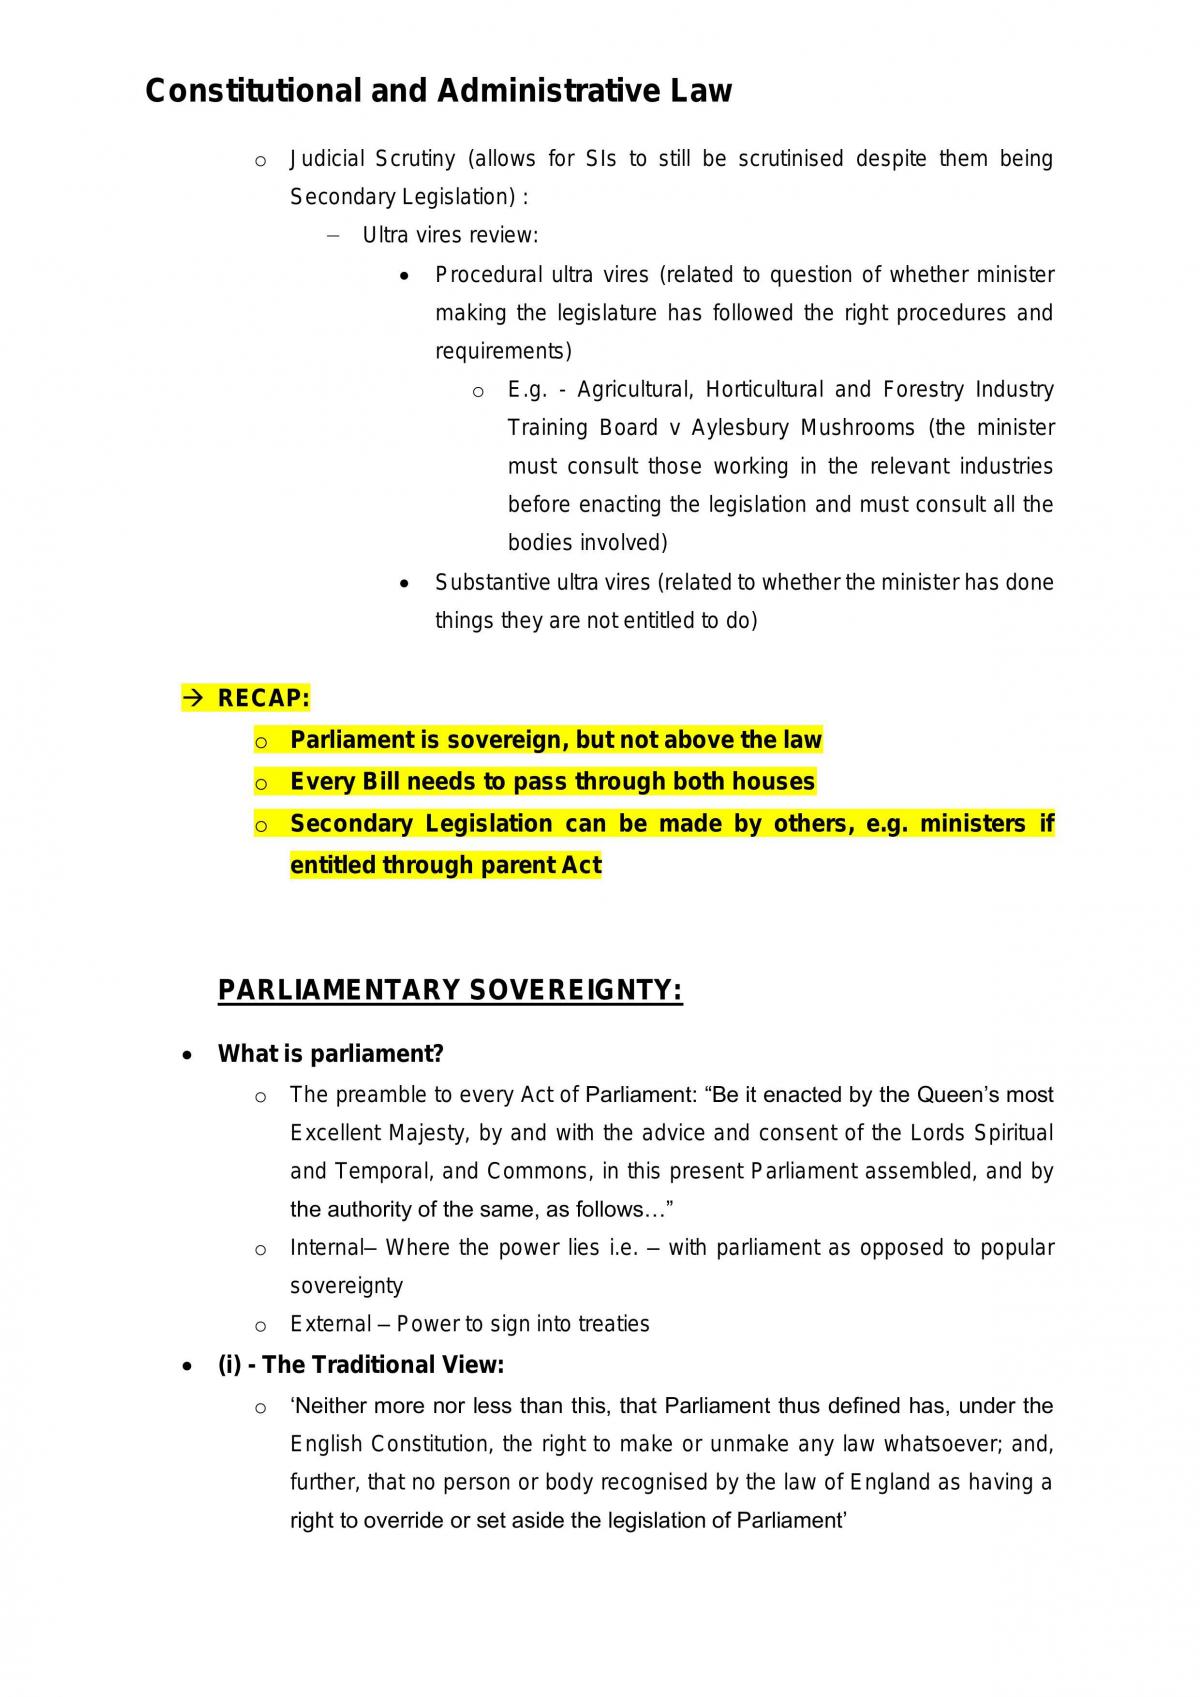 Constitutional and Administrative Law notes compilation - Page 23